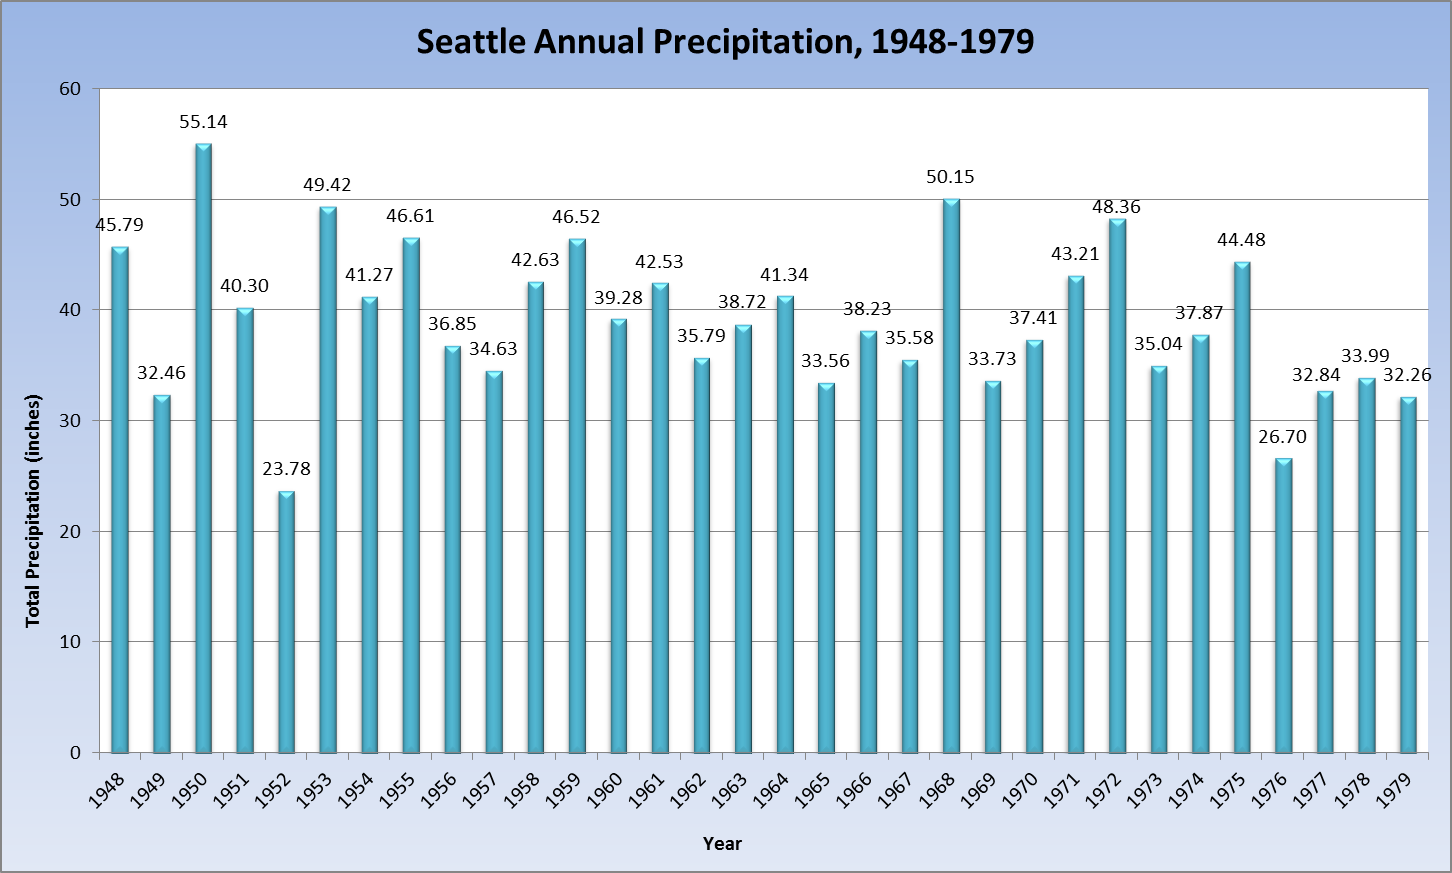 seattle rain precipitation year years inches city stats wettest weather history record fell 1950 two making 1952 doused just